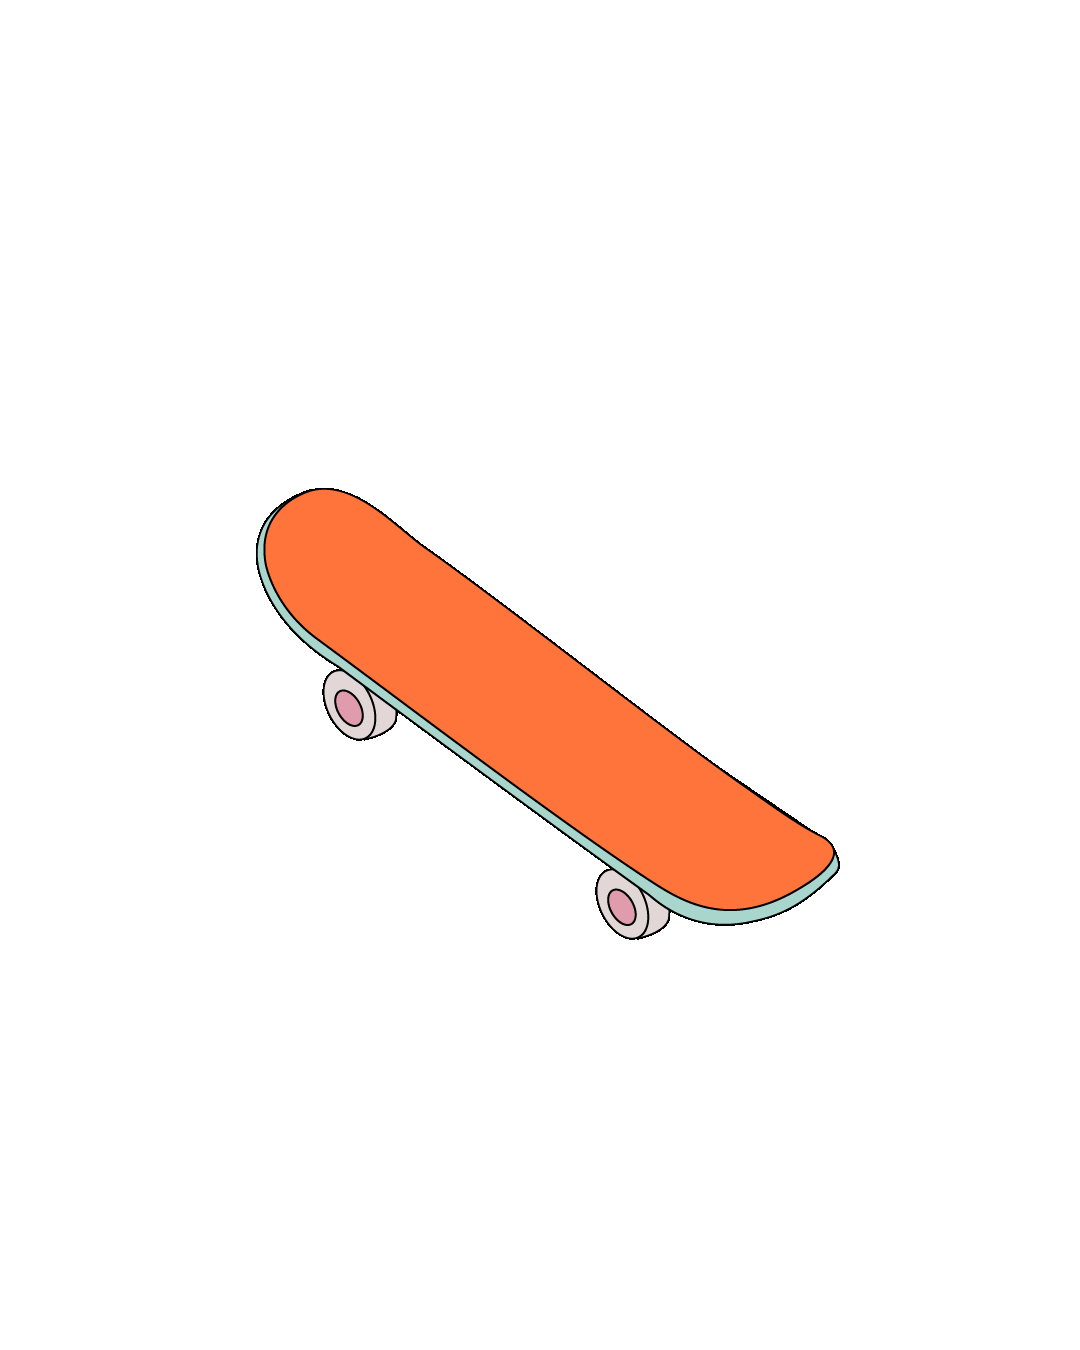 Skateboard and laptop gif melting into one another gif 